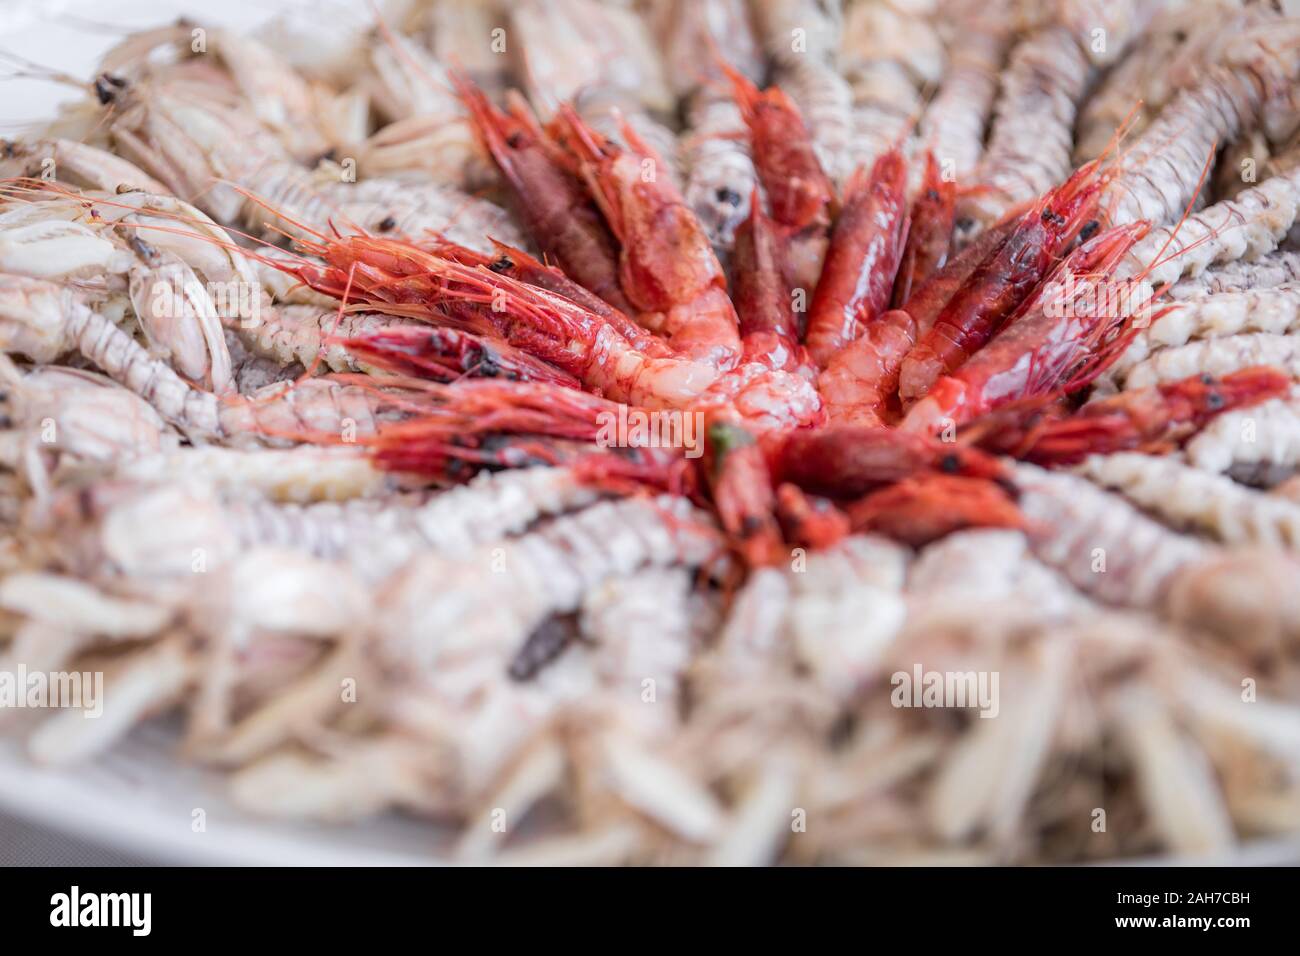 Close up of a food composition made of red prawns in the middle, and slipper lobsters all around Stock Photo